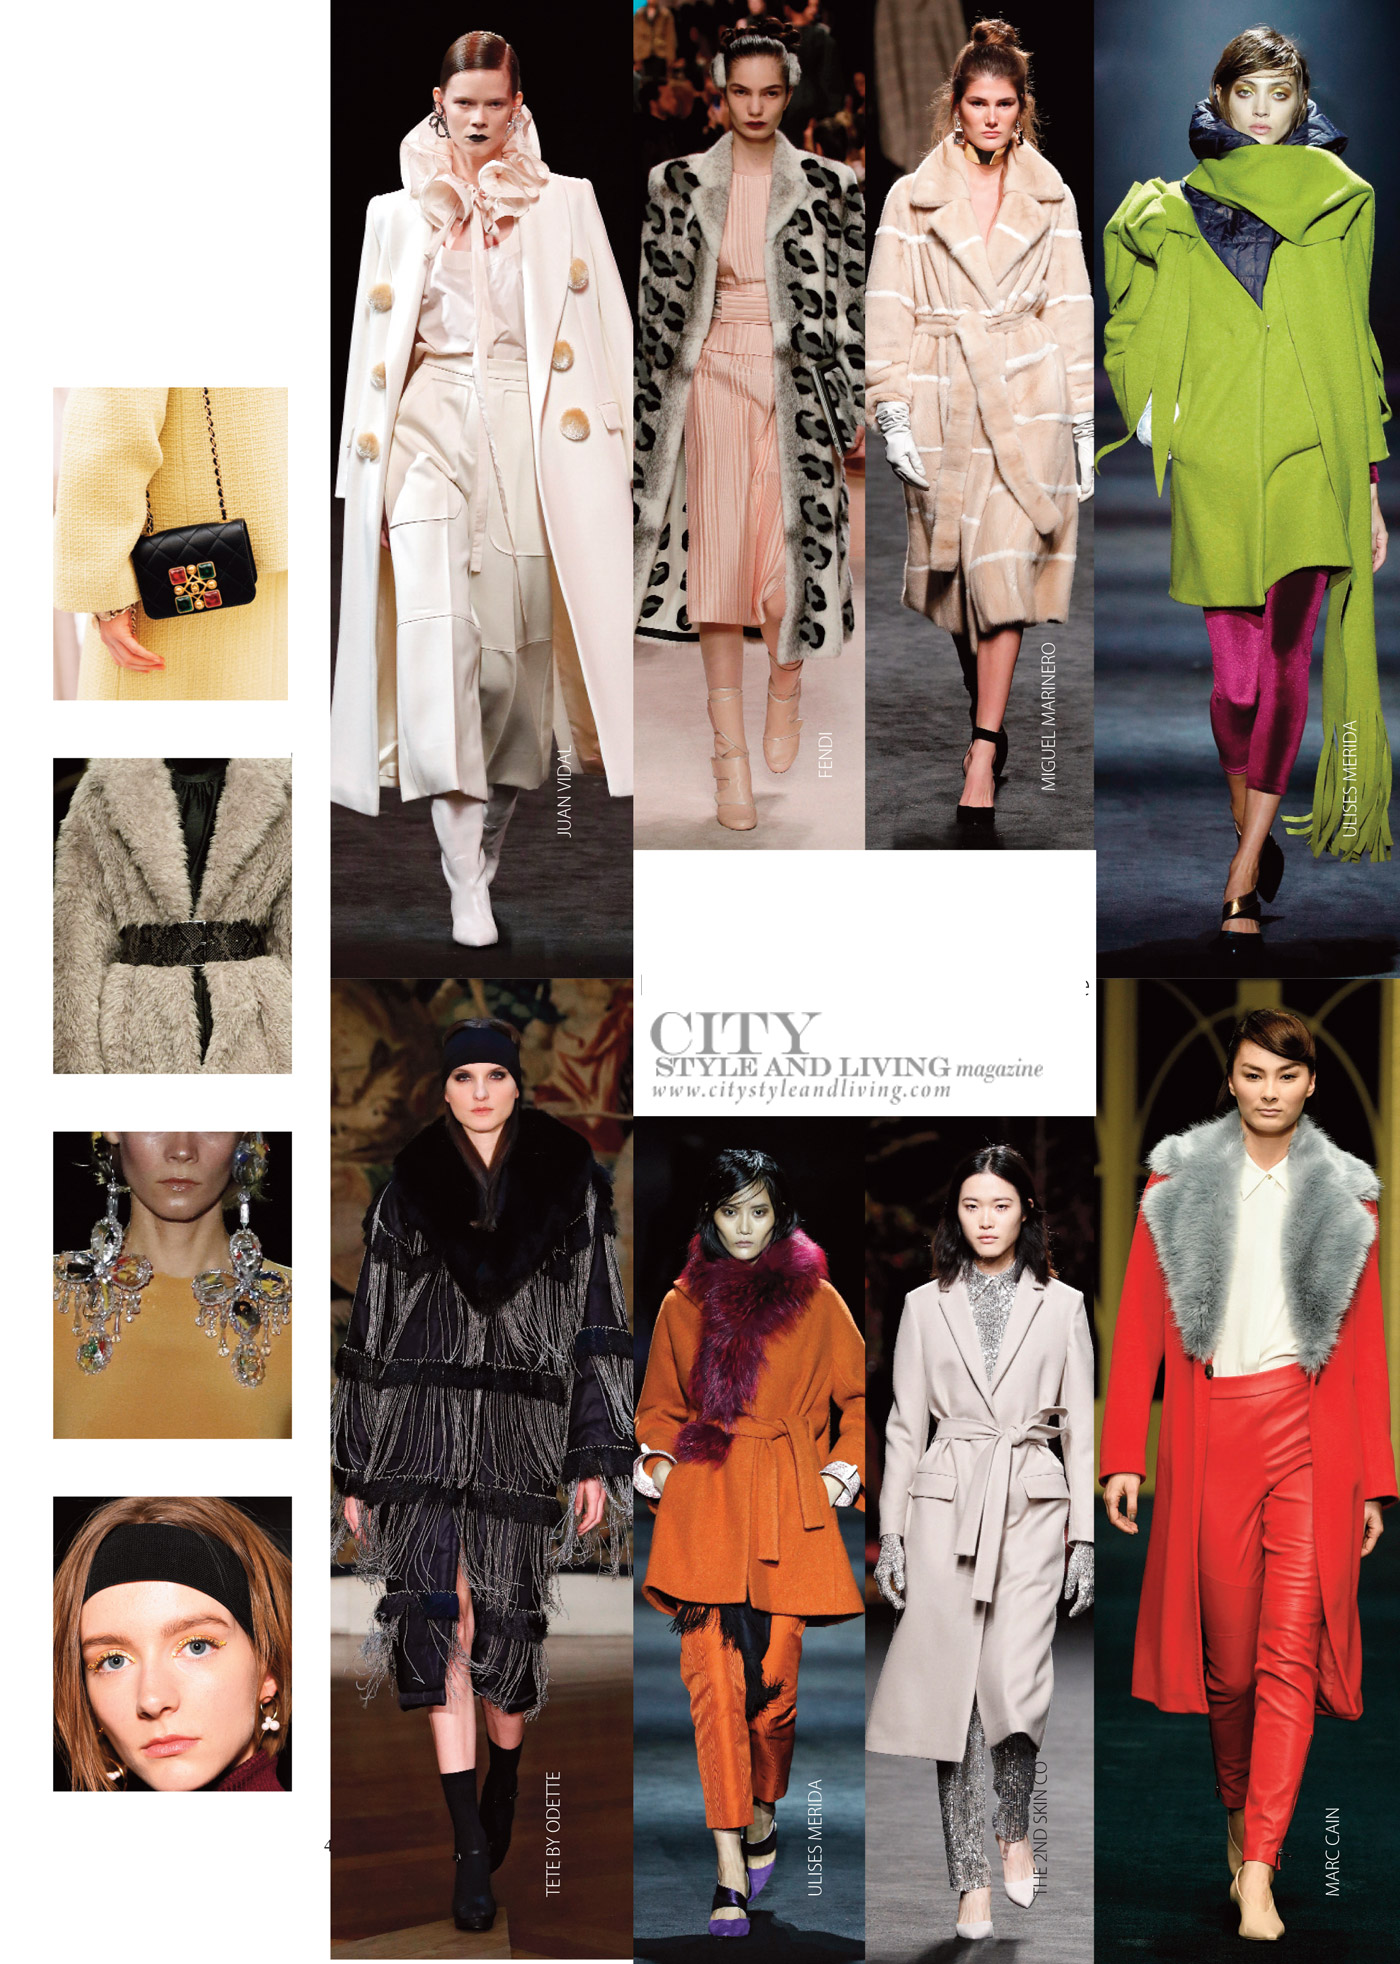 City Style and Living Magazine Winter 2020 3 Ways the Runway Will Inspire You part 2